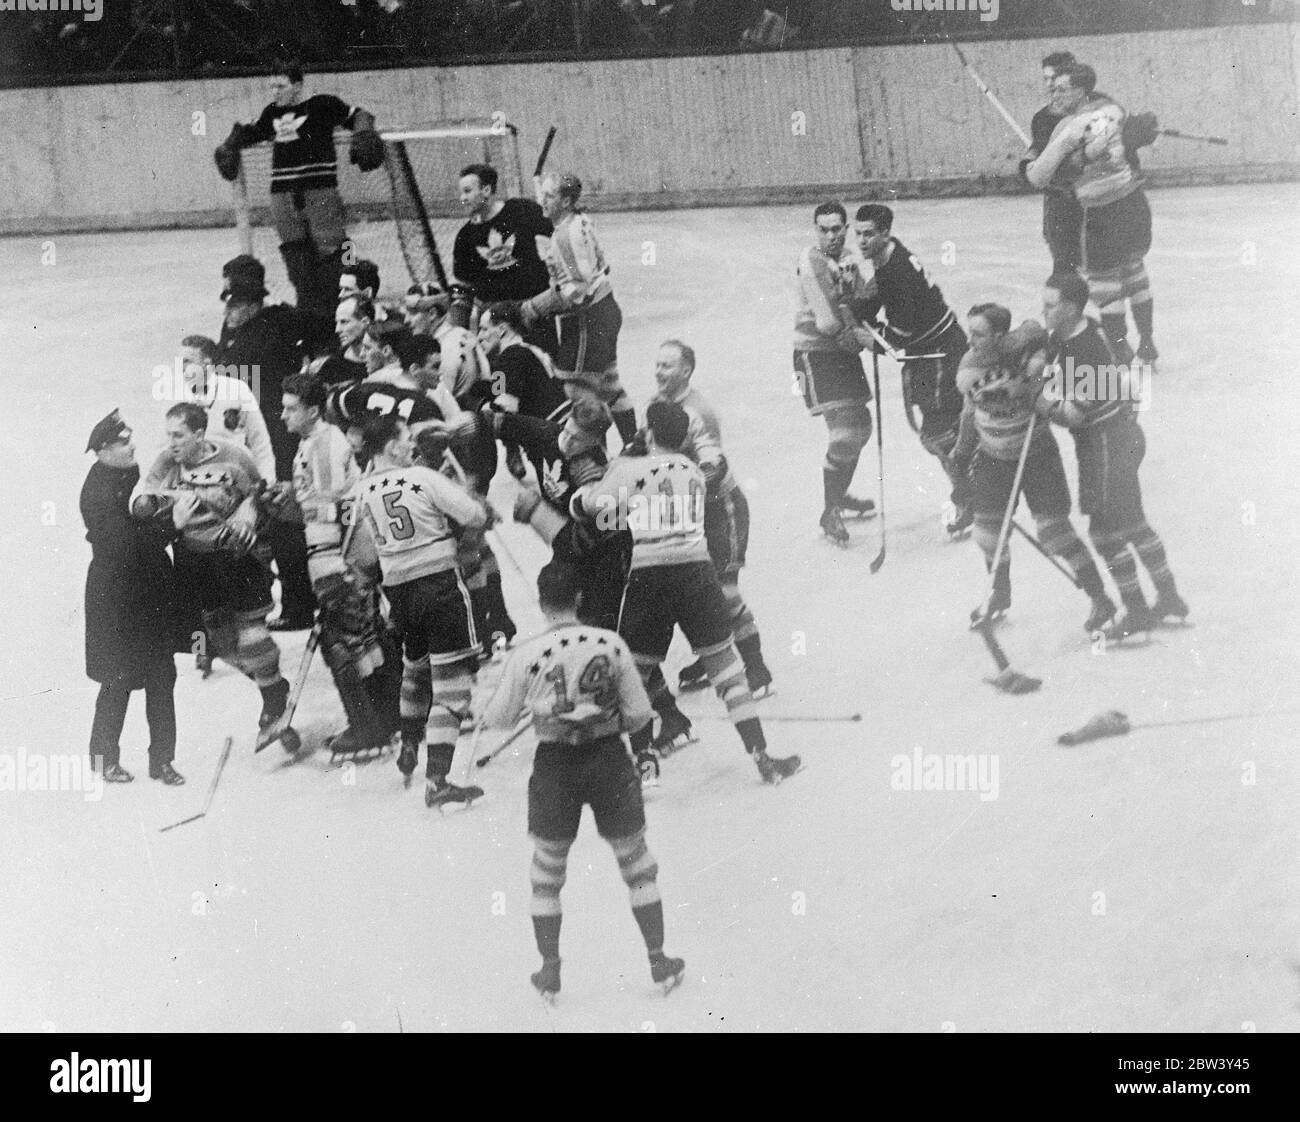 New York Ice hockey match ends in free fight , Police intervene . A free fight , in which a squad of police were forced to intervene to restore order , marked the ice hockey match between the New York Americas , and Toronto Maple Leafs at the Madison Square Gardens , new York . The Americans defeated the Maple Leafs 3 - 1 . Photo shows , the fight between the two teams on the ice at Madison Square Gardens . Jenkins ( 10 ) of the Americans is holding one of the Toronto players as he strikes at Emms ( 15 ) , also of the Americans . Left is Schriner ( Americans ) being held by a policeman . 9 Mar Stock Photo